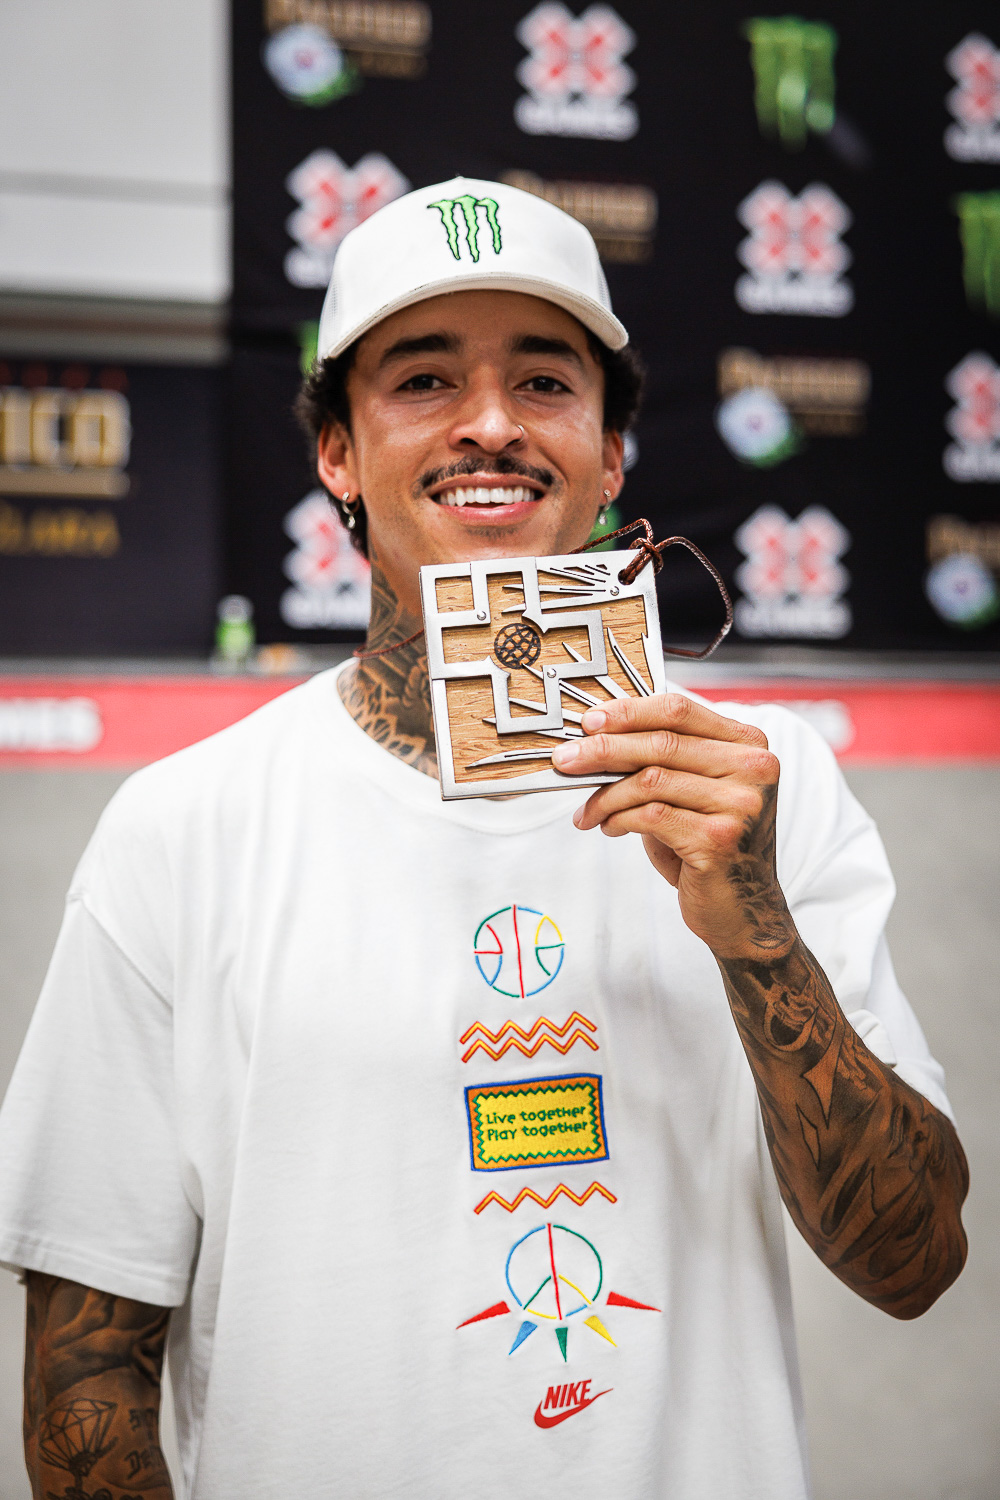 Monster Energy's Nyjah Huston Takes Silver in Skateboard Street at X Games 2022